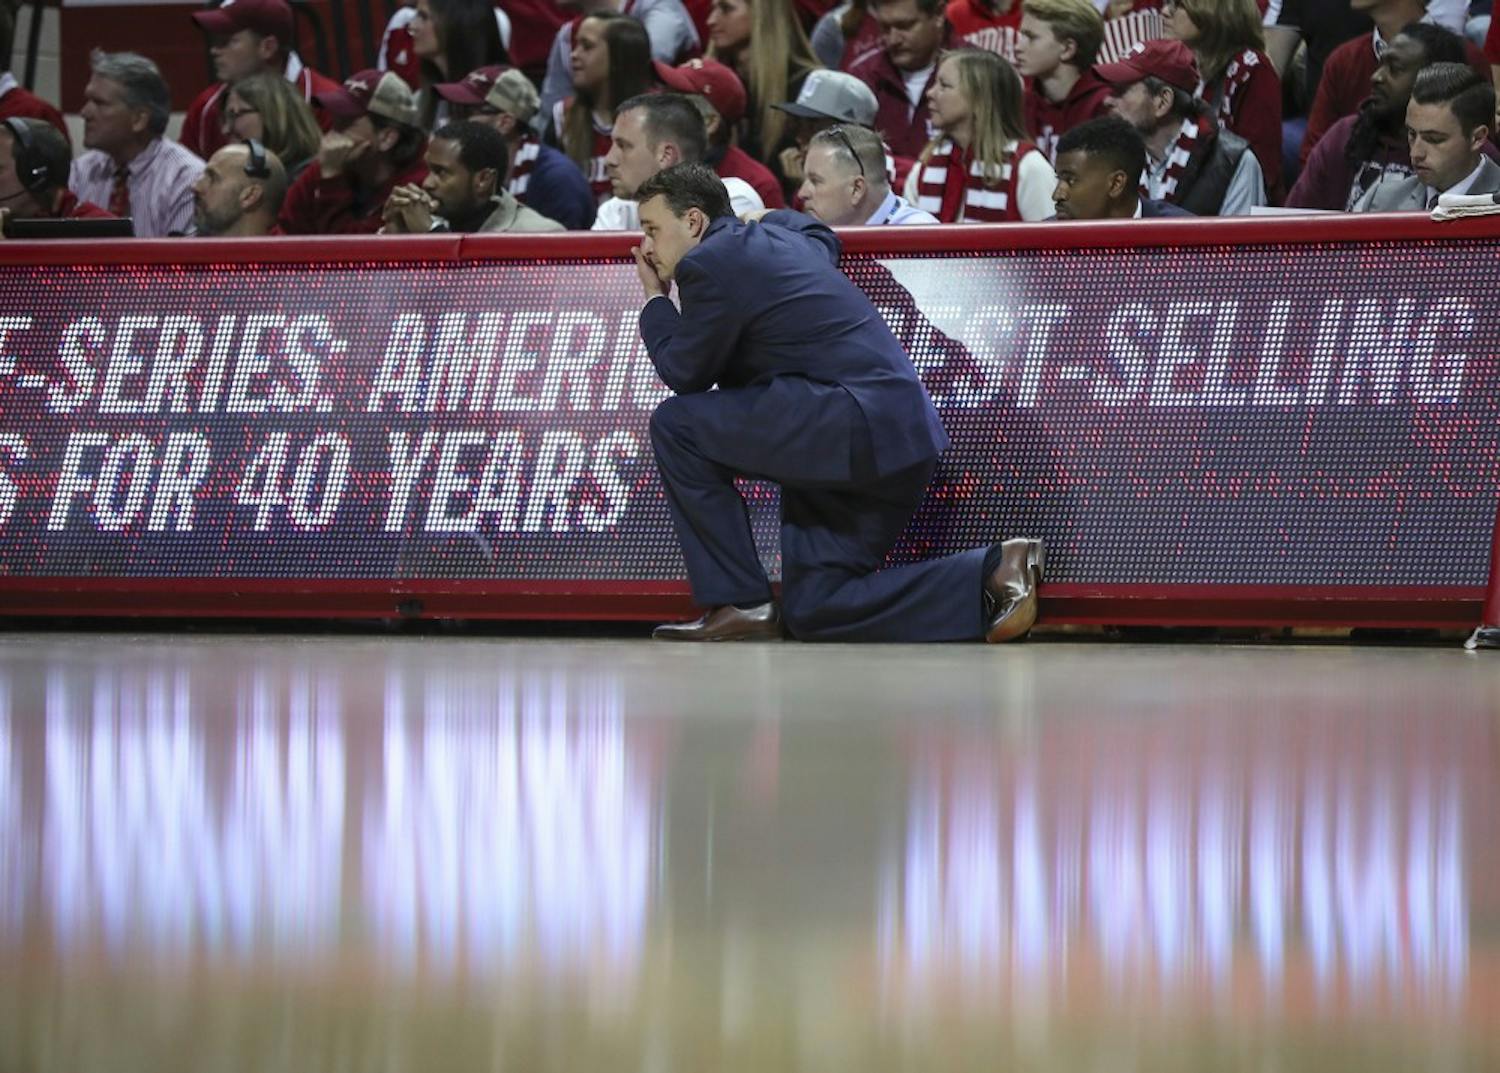 GALLERY: Hoosiers lose to the Sycamores 69-90